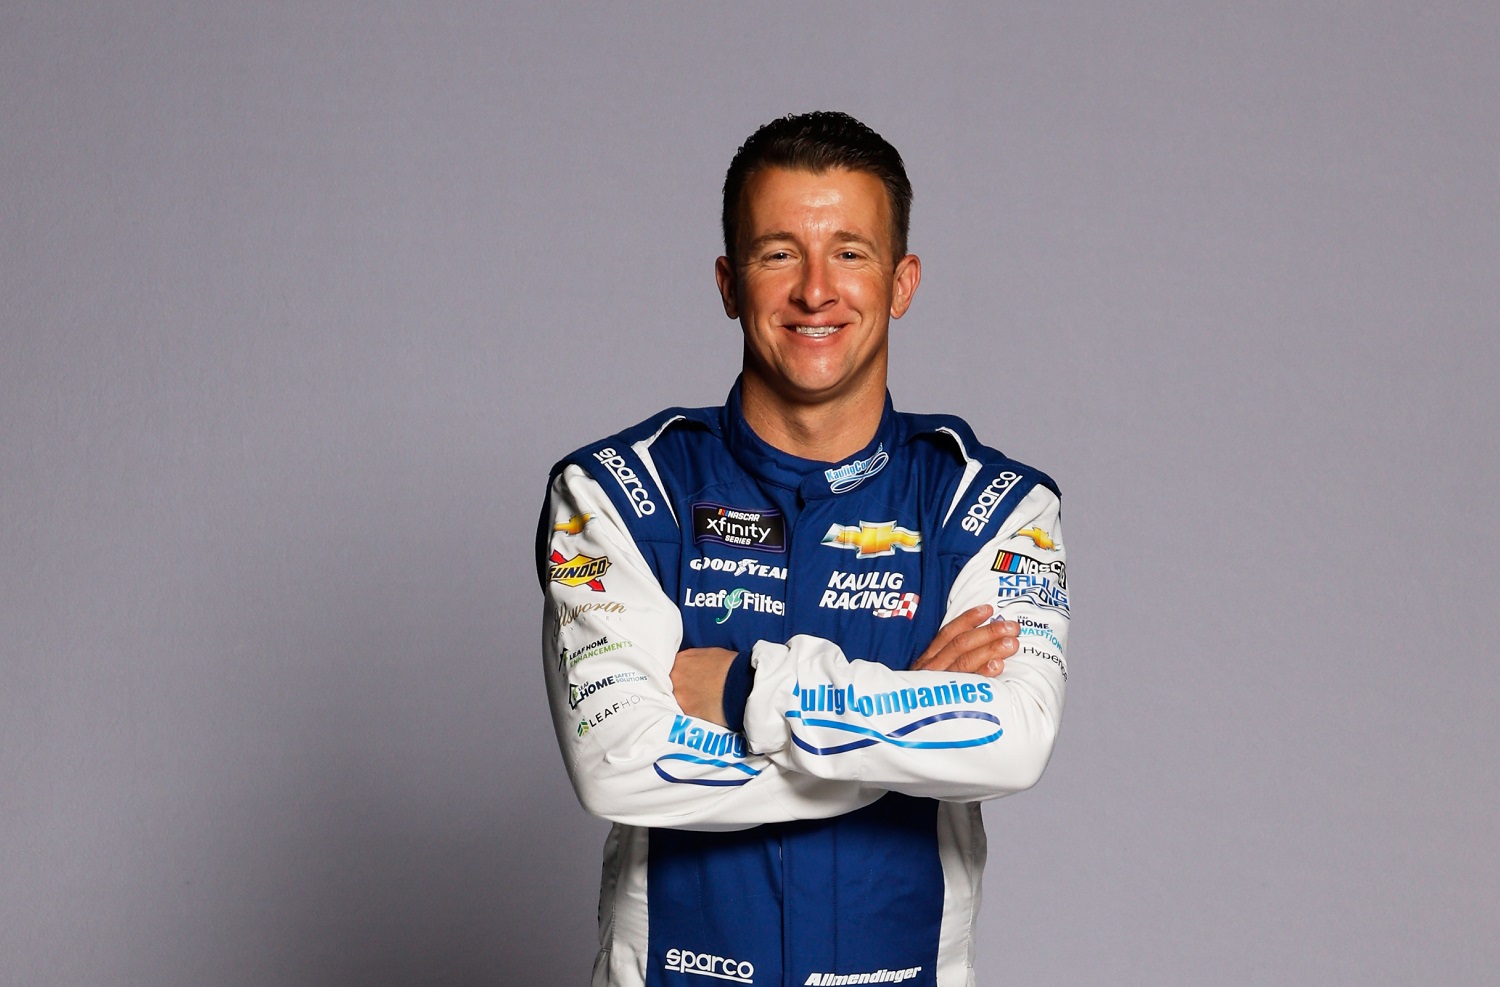 Kaulig Racing driver AJ Allmendinger poses for a photo during NASCAR Production Days at Clutch Studios on Jan. 18, 2022, in Concord, North Carolina. | Chris Graythen/Getty Images